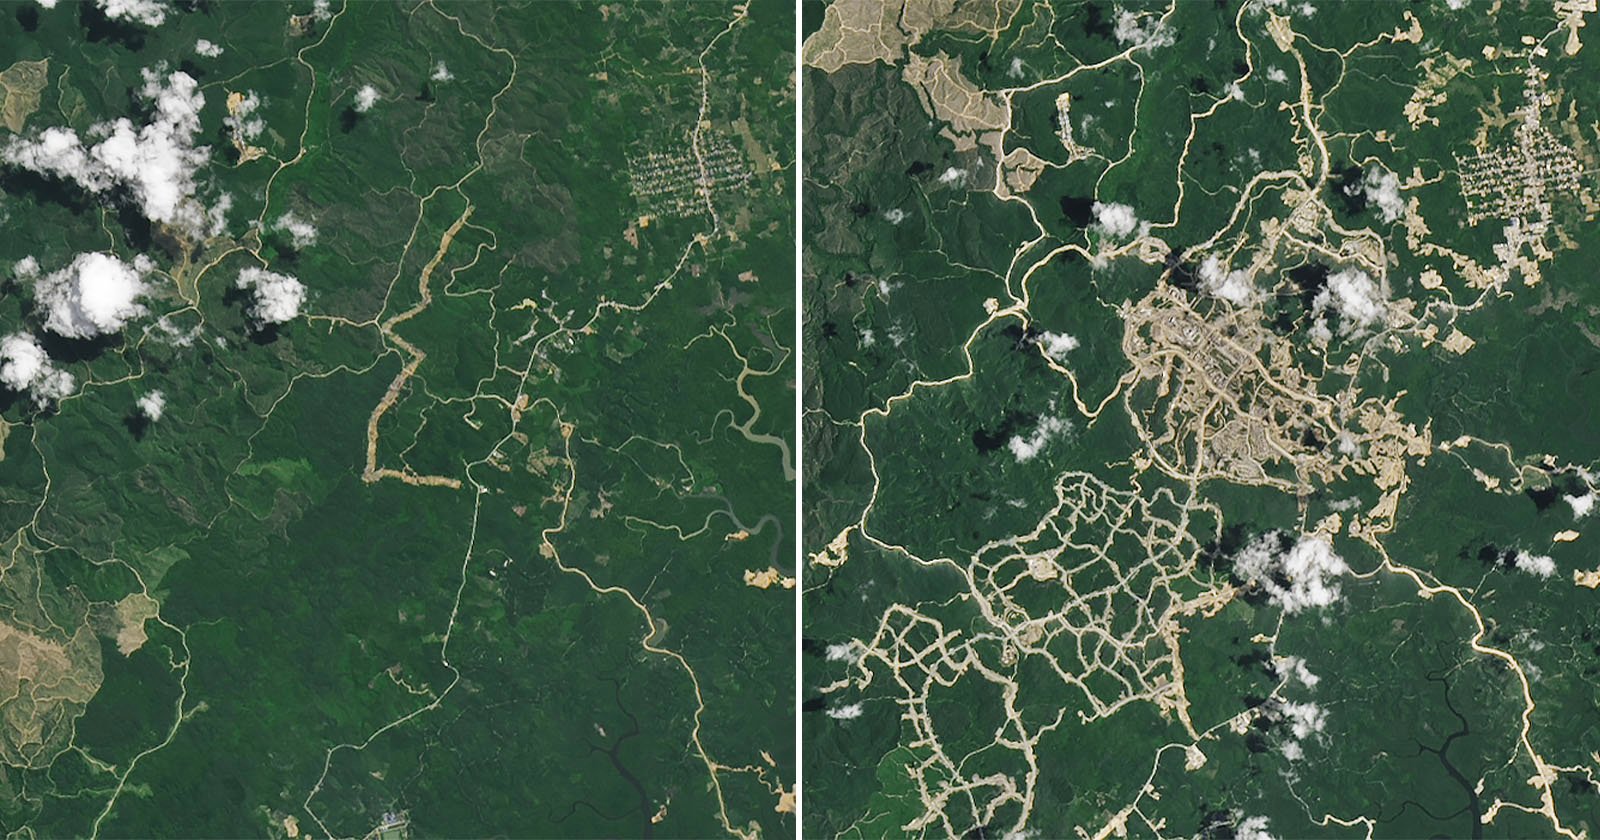 Worlds Newest Capital City Seen Emerging From Space in Satellite Photos